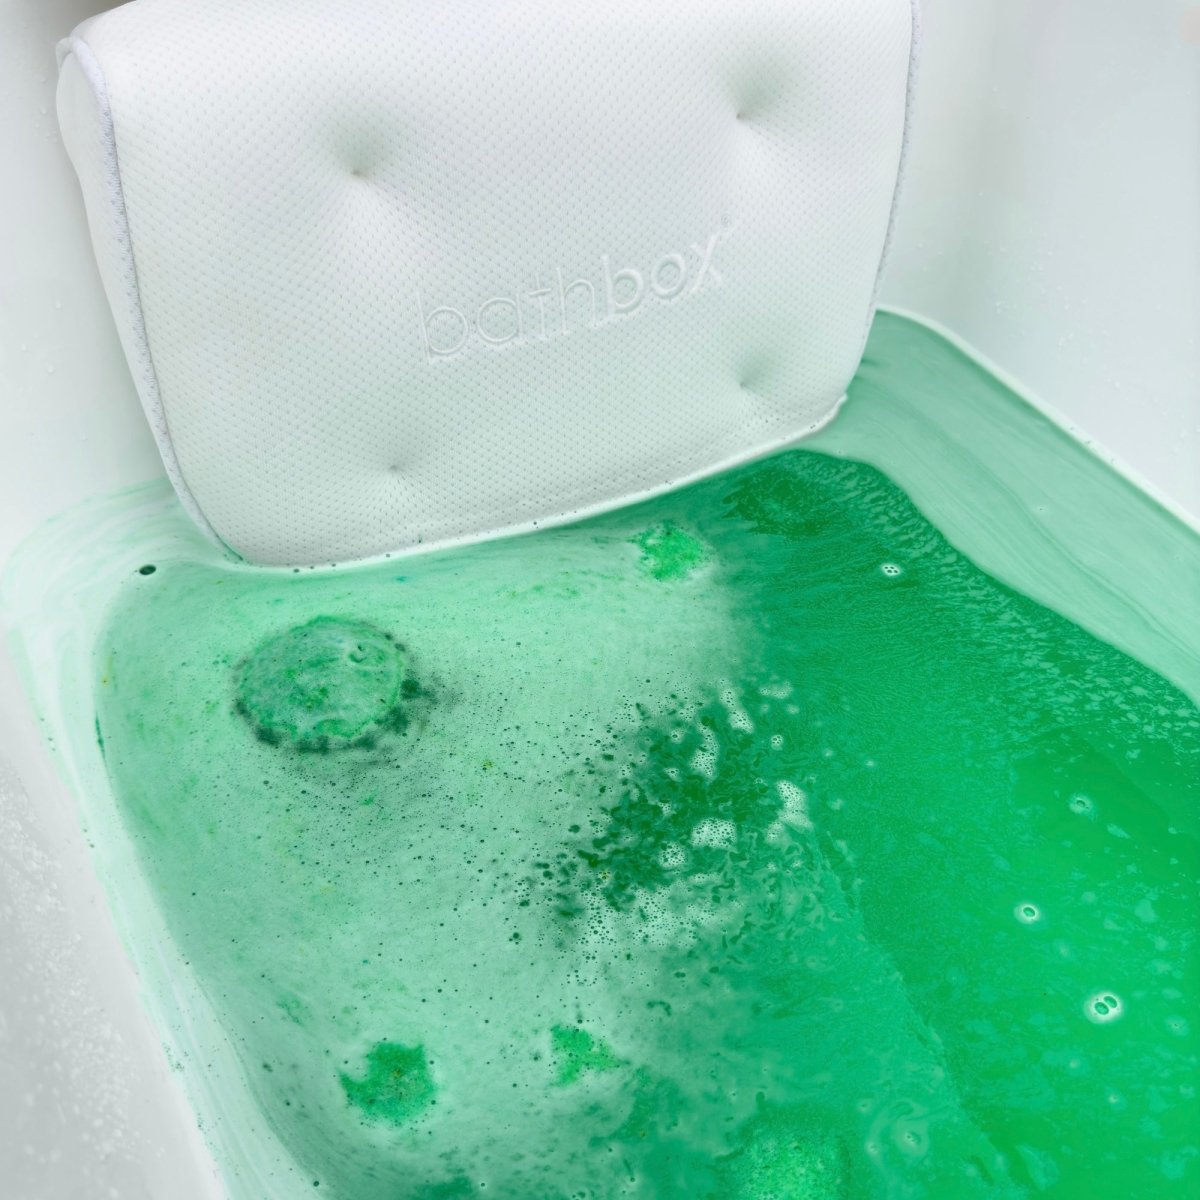 Detox Bath Bomb for Kids & Adults - Aromatherapy Benefits With Green Tea Fragrance - Made in Australia by Bath Box